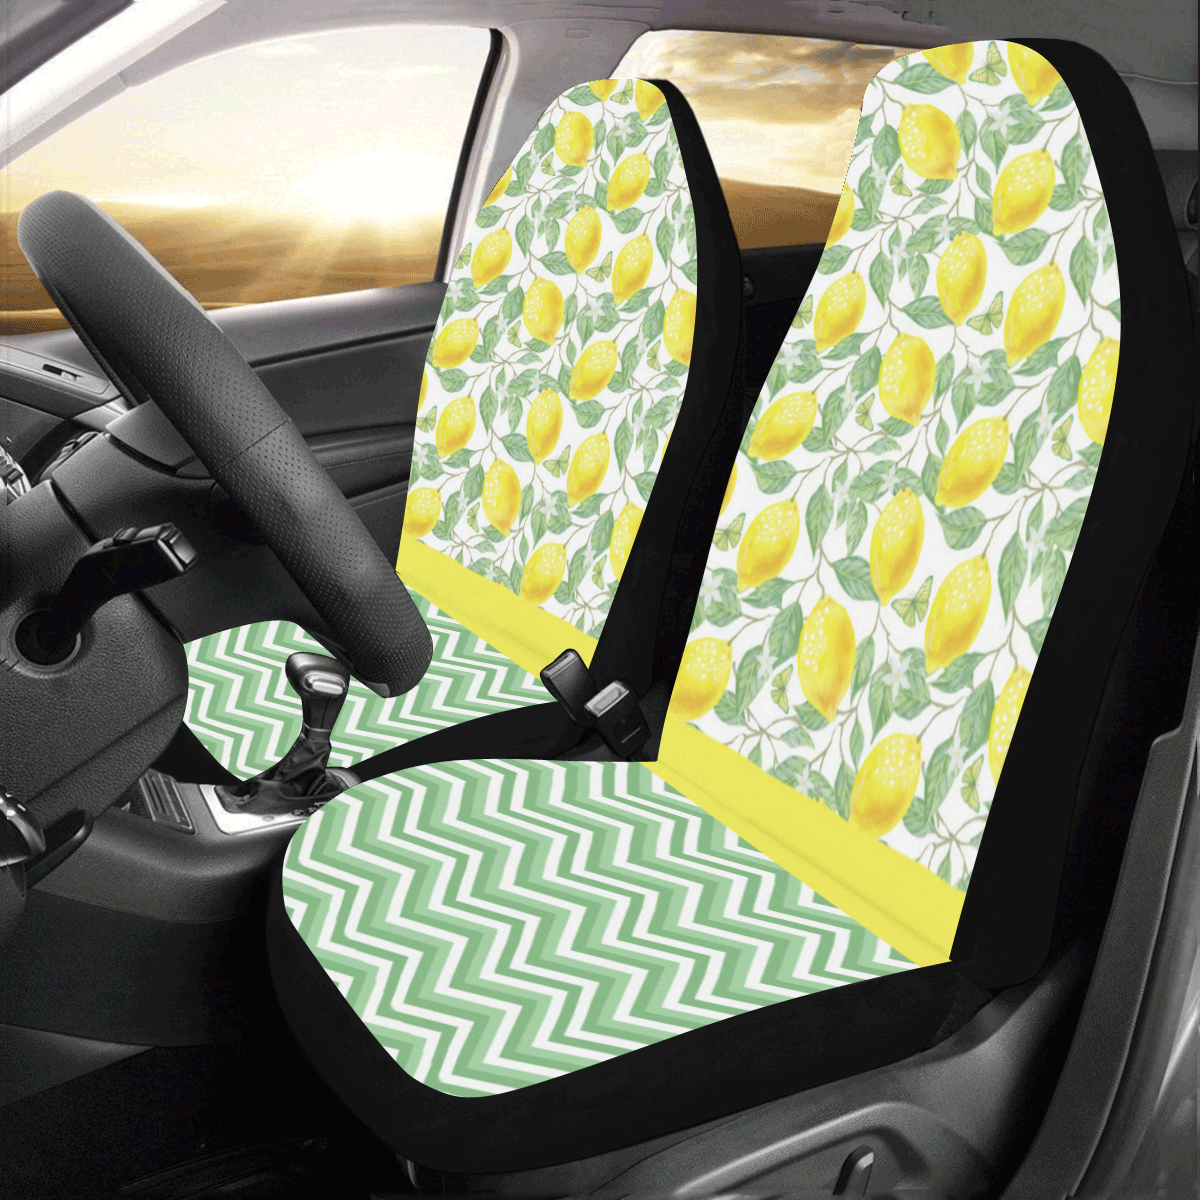 Lemons With Chevron 2 Car Seat Covers (Set of 2)